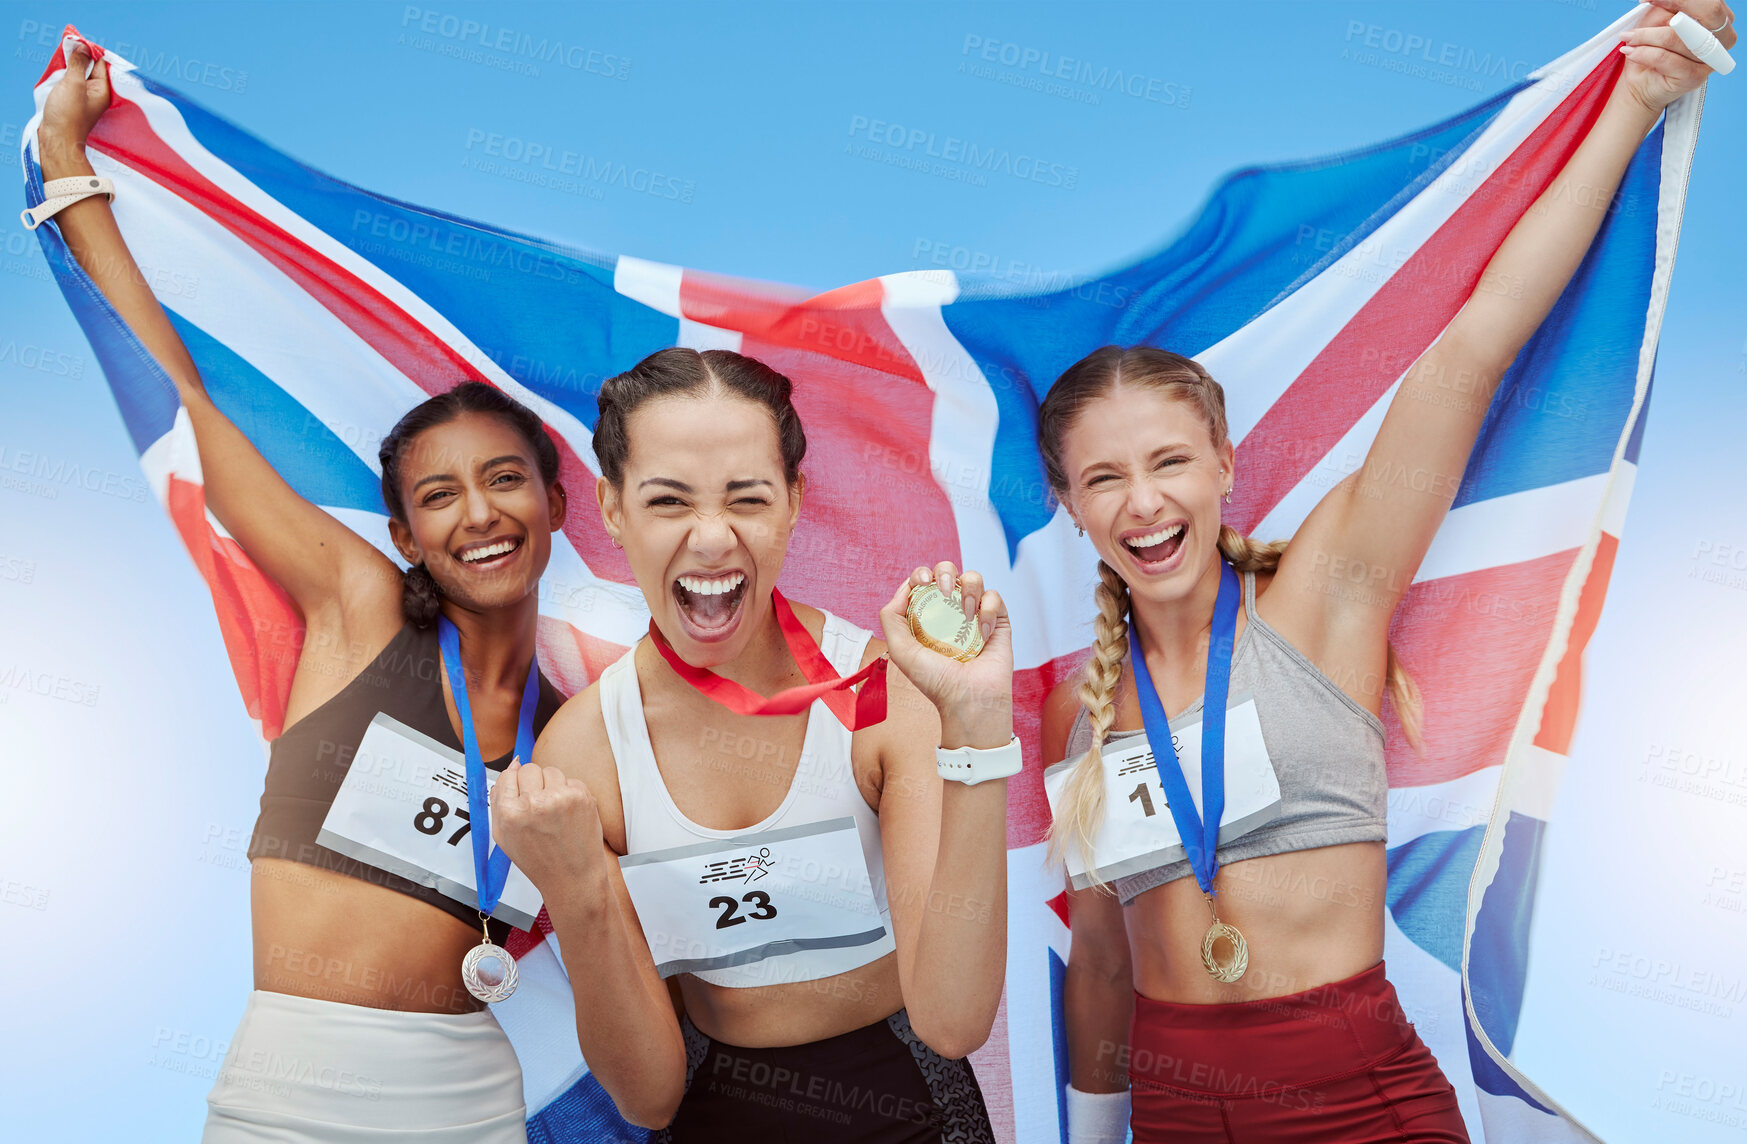 Buy stock photo Diver British athletes celebrating their olympic gold medal wins, waving a Union Jack flag. Happy and proud champions of United Kingdom. Winning a medal for your country is an amazing achievement